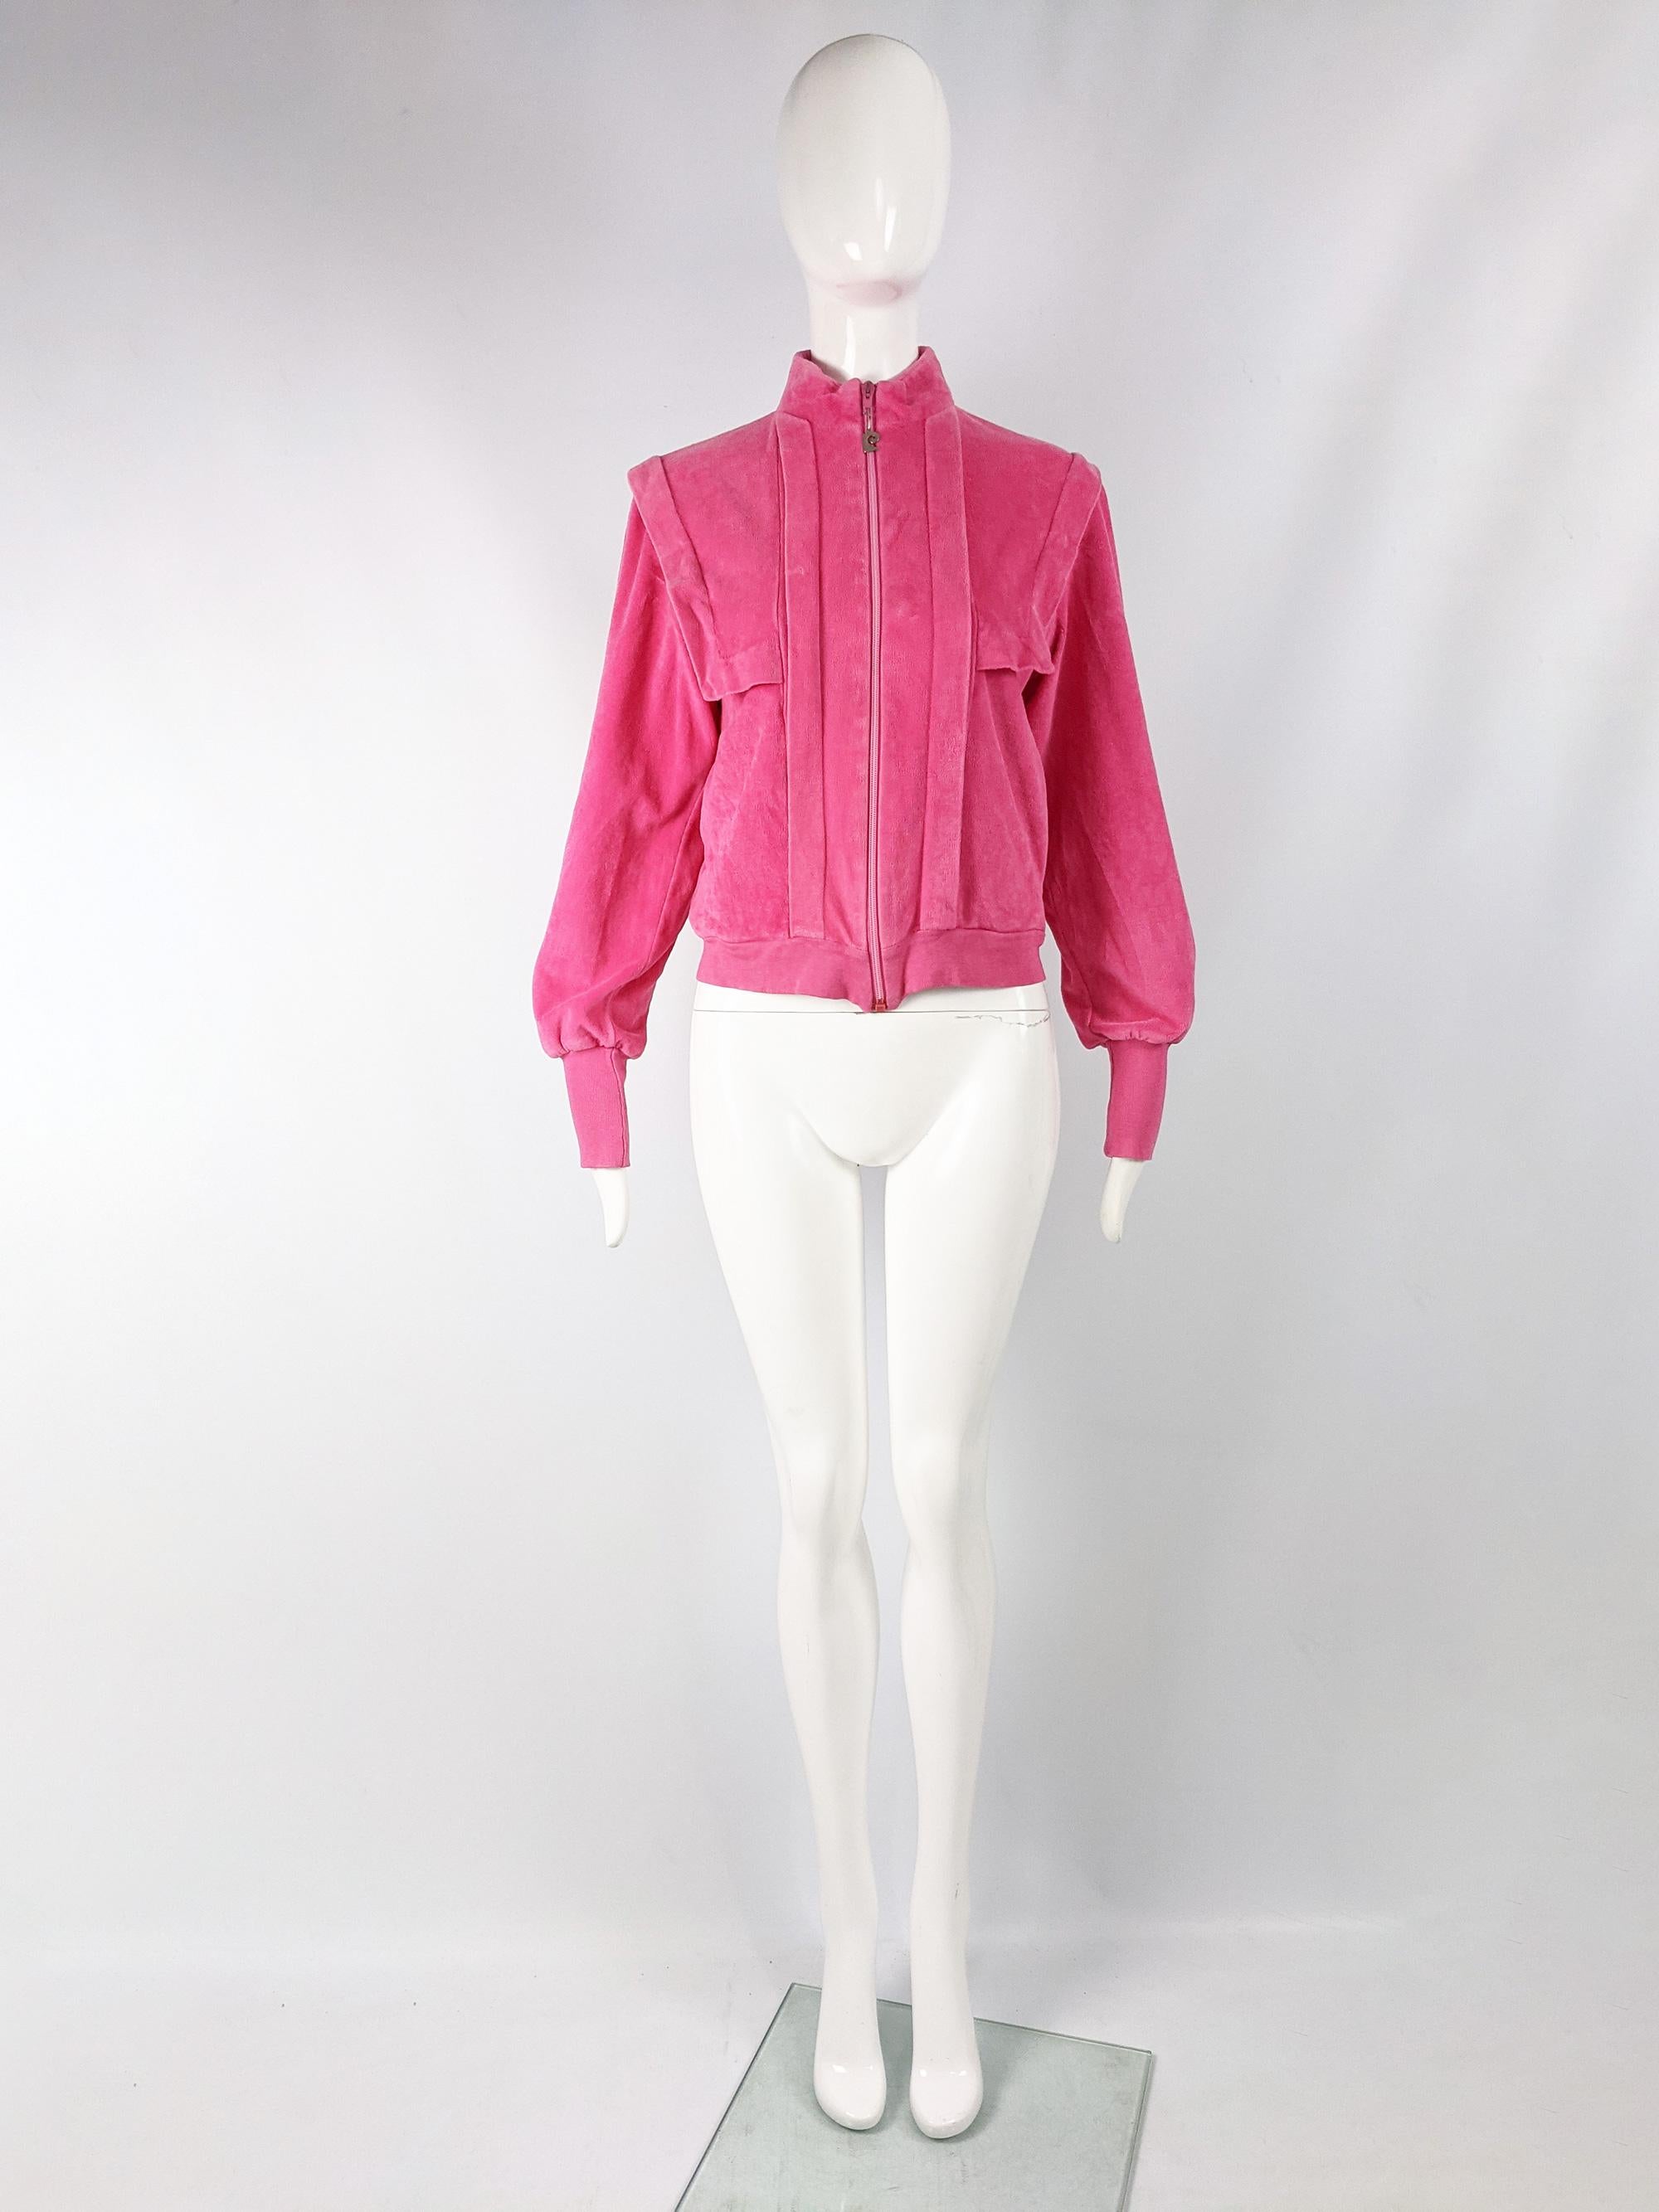 A fabulous vintage womens bomber jacket from the 80s by luxury French fashion designer, Pierre Cardin. In a pink chenille / velour with a high neck and branded zip pull. 

Size: Marked S
Bust - 38” / 96cm
Waist - 36” / 91cm
Length (Shoulder to Hem)